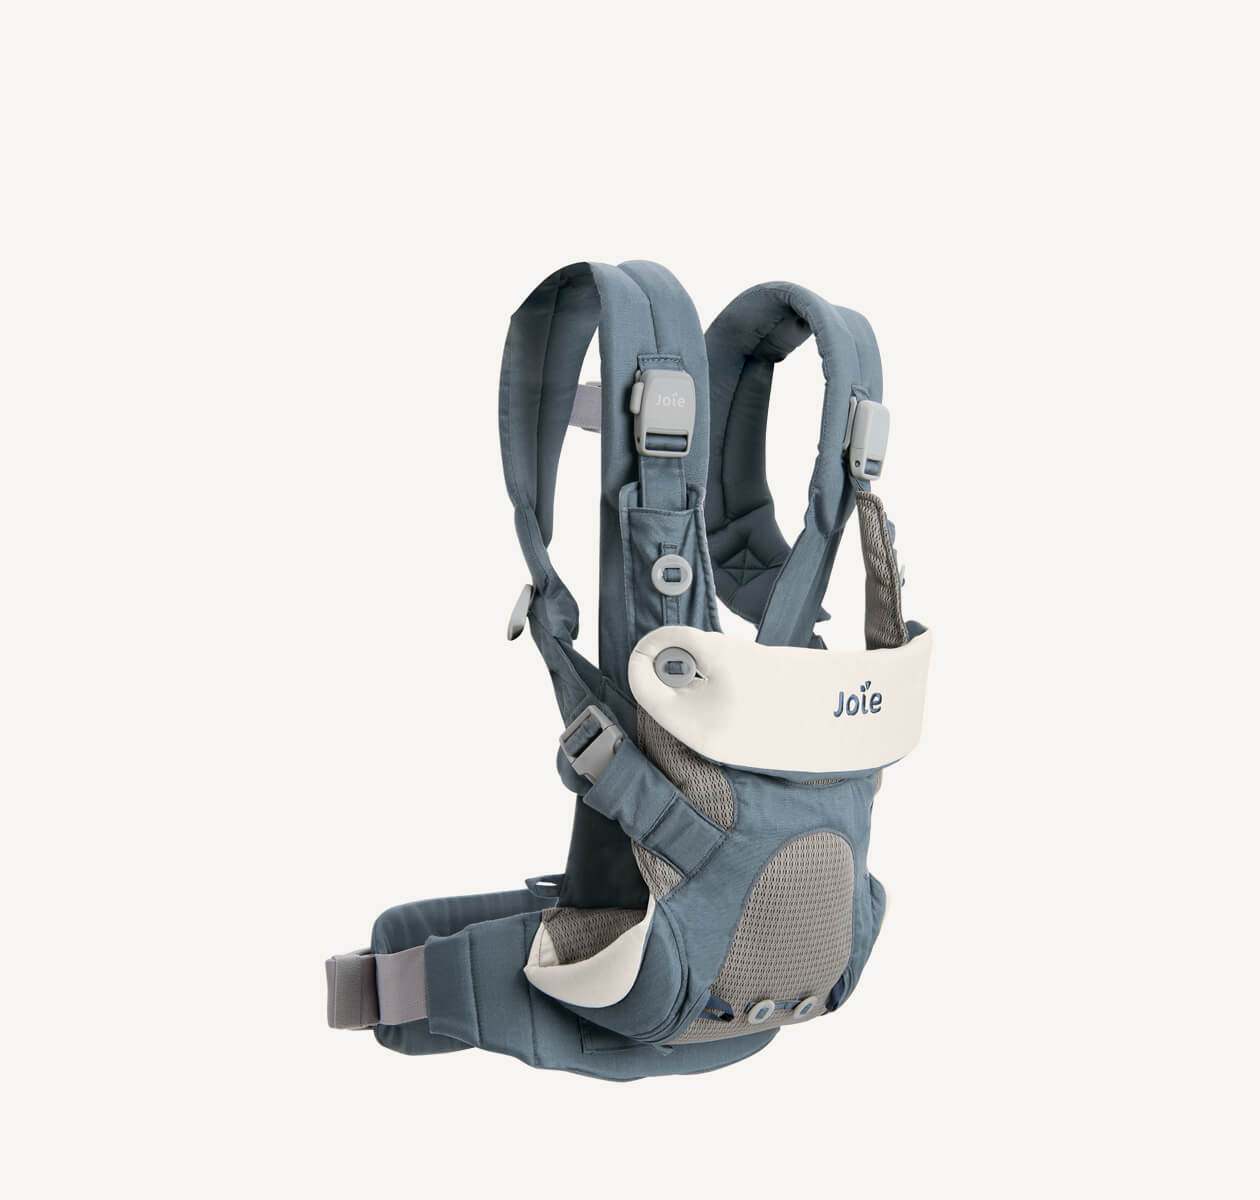 A blue Joie Savvy 4in1 baby carrier at an angle facing right